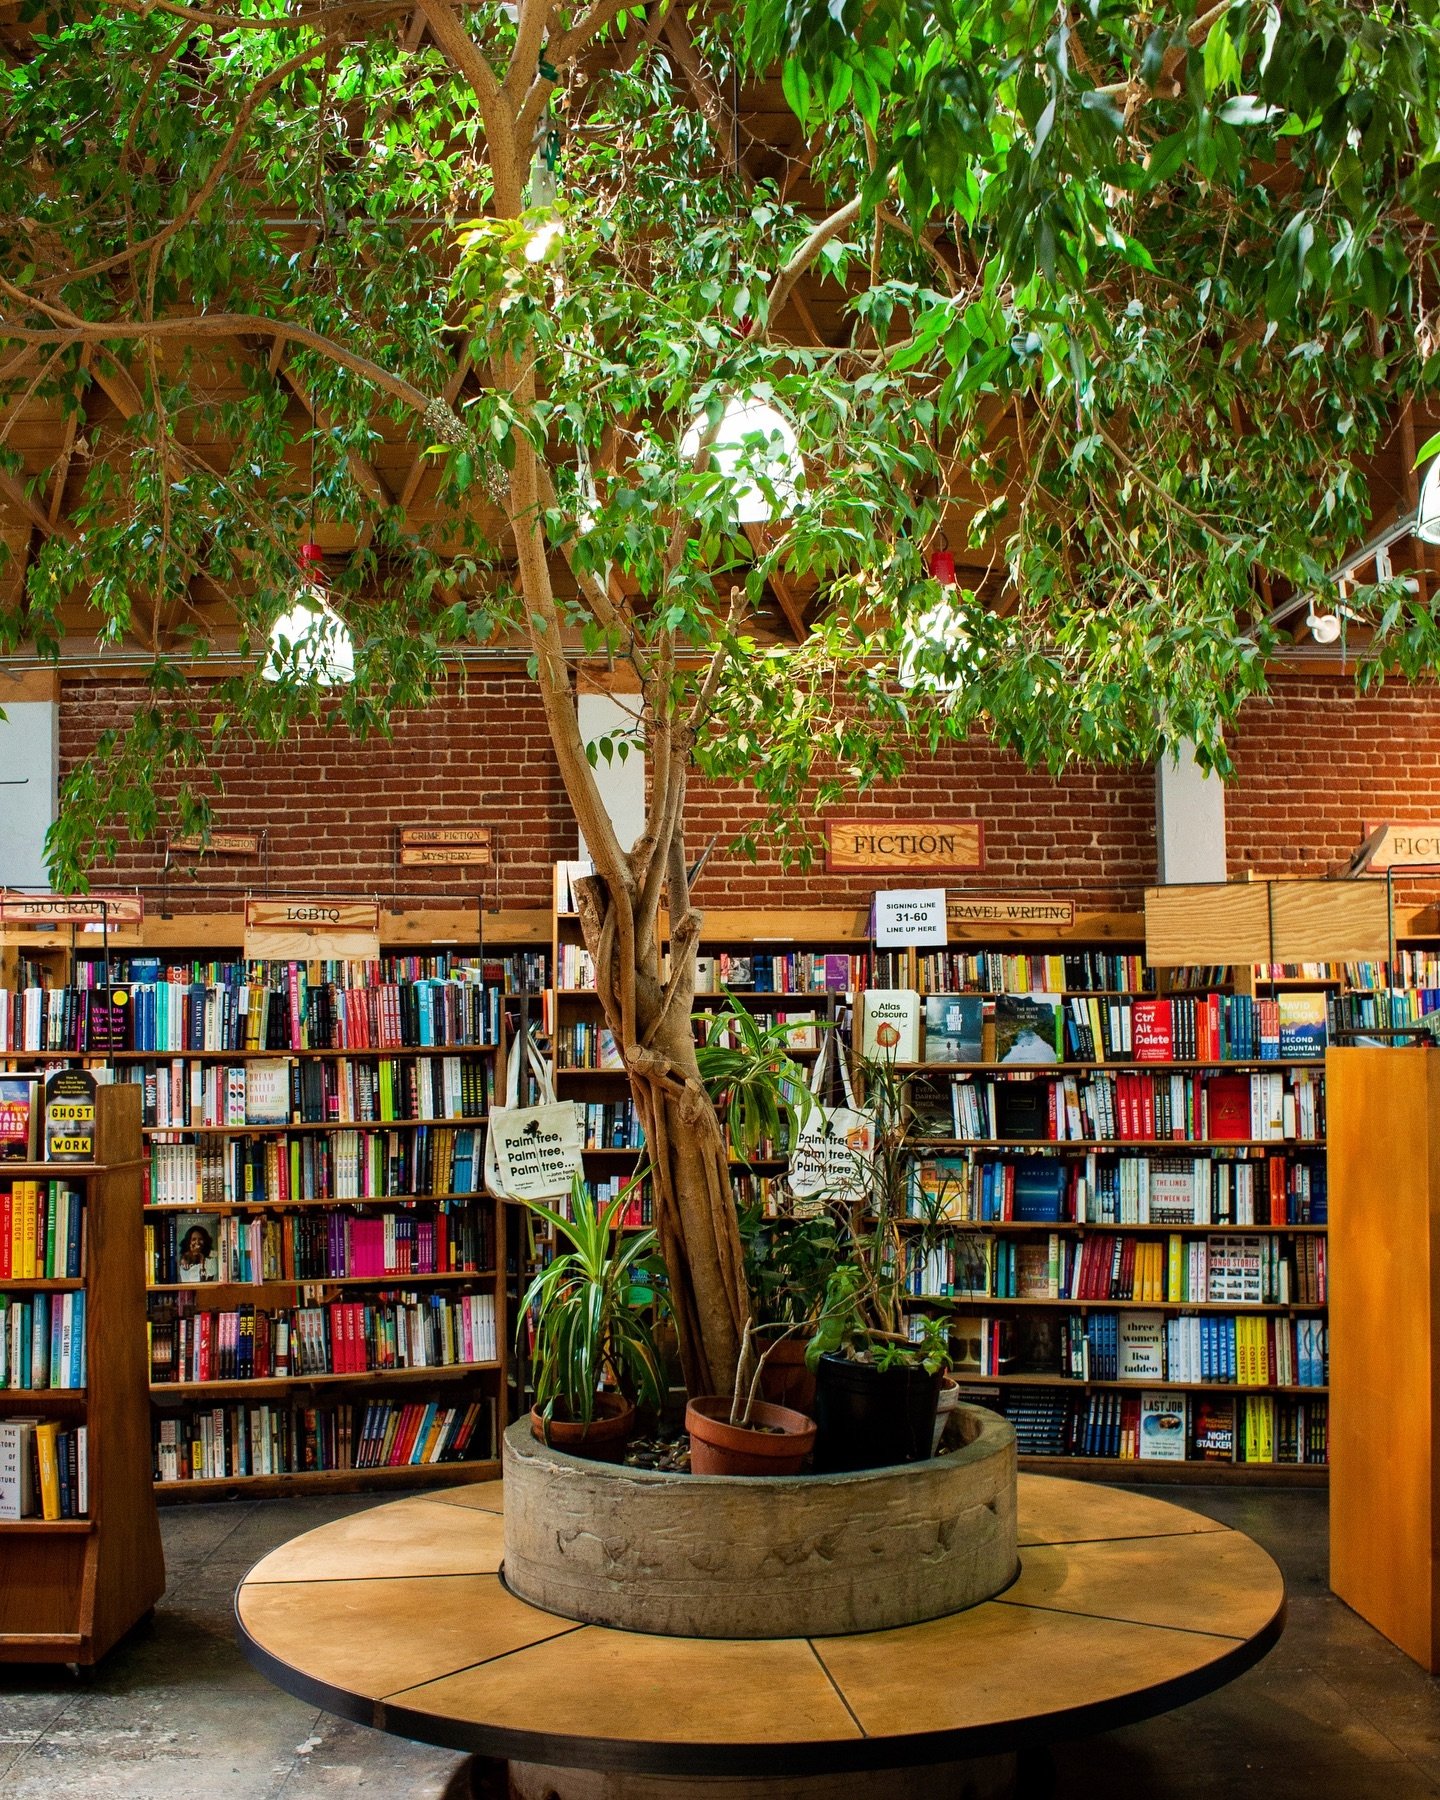 Happy Independent Bookstore Day! Today is a beautiful day to go out and celebrate your local indie bookstore, to take part in their events, and to chat with the booksellers about new titles and recommendations. Though if you&rsquo;re not able to visi